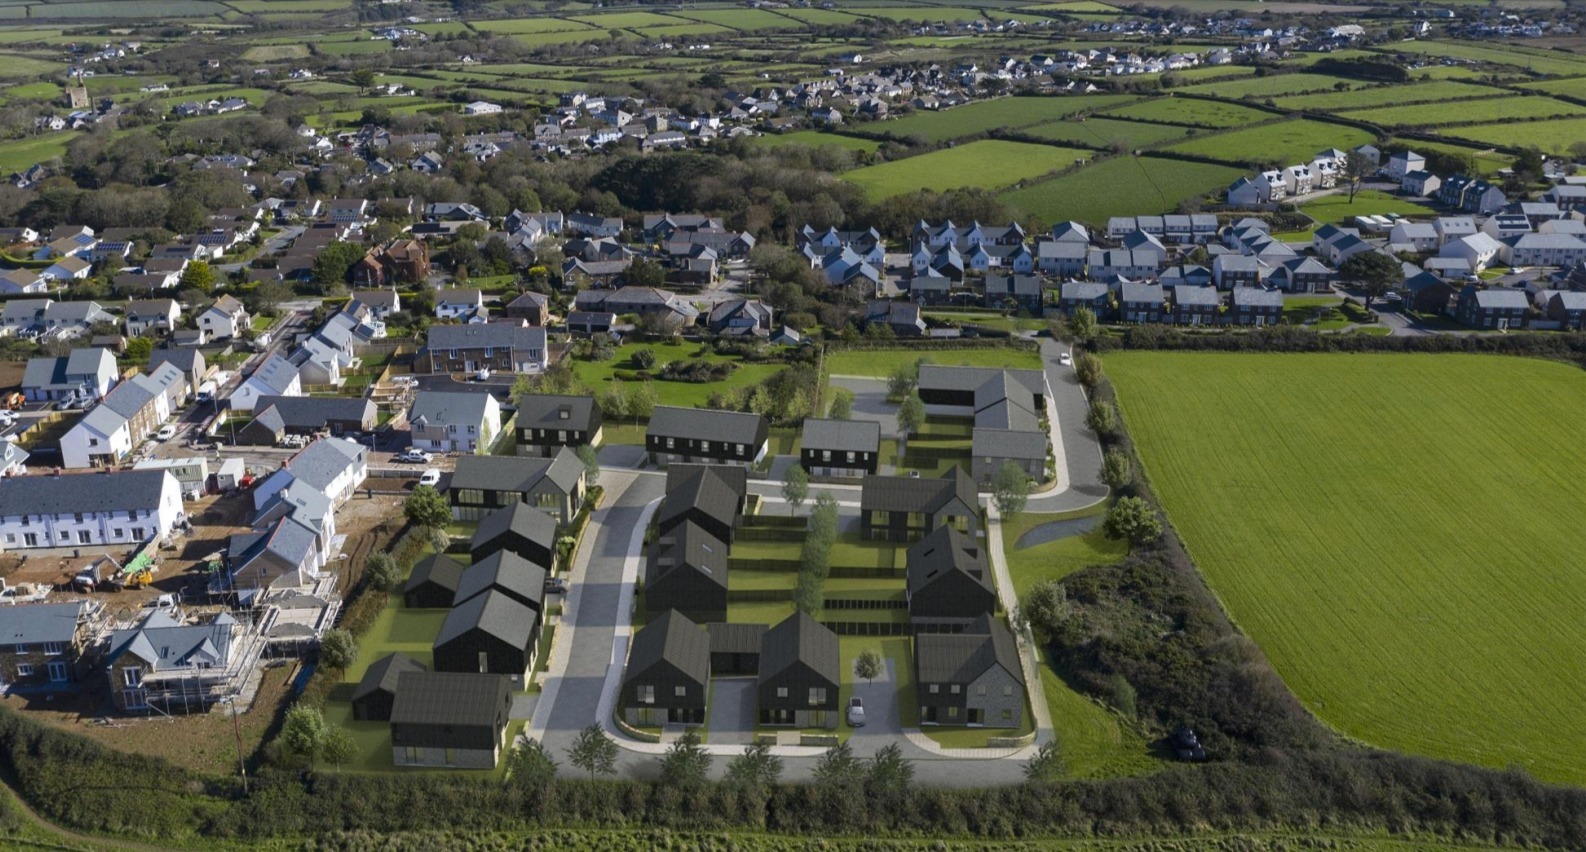 Photomontage showing how the proposed housing development in St Agnes could look